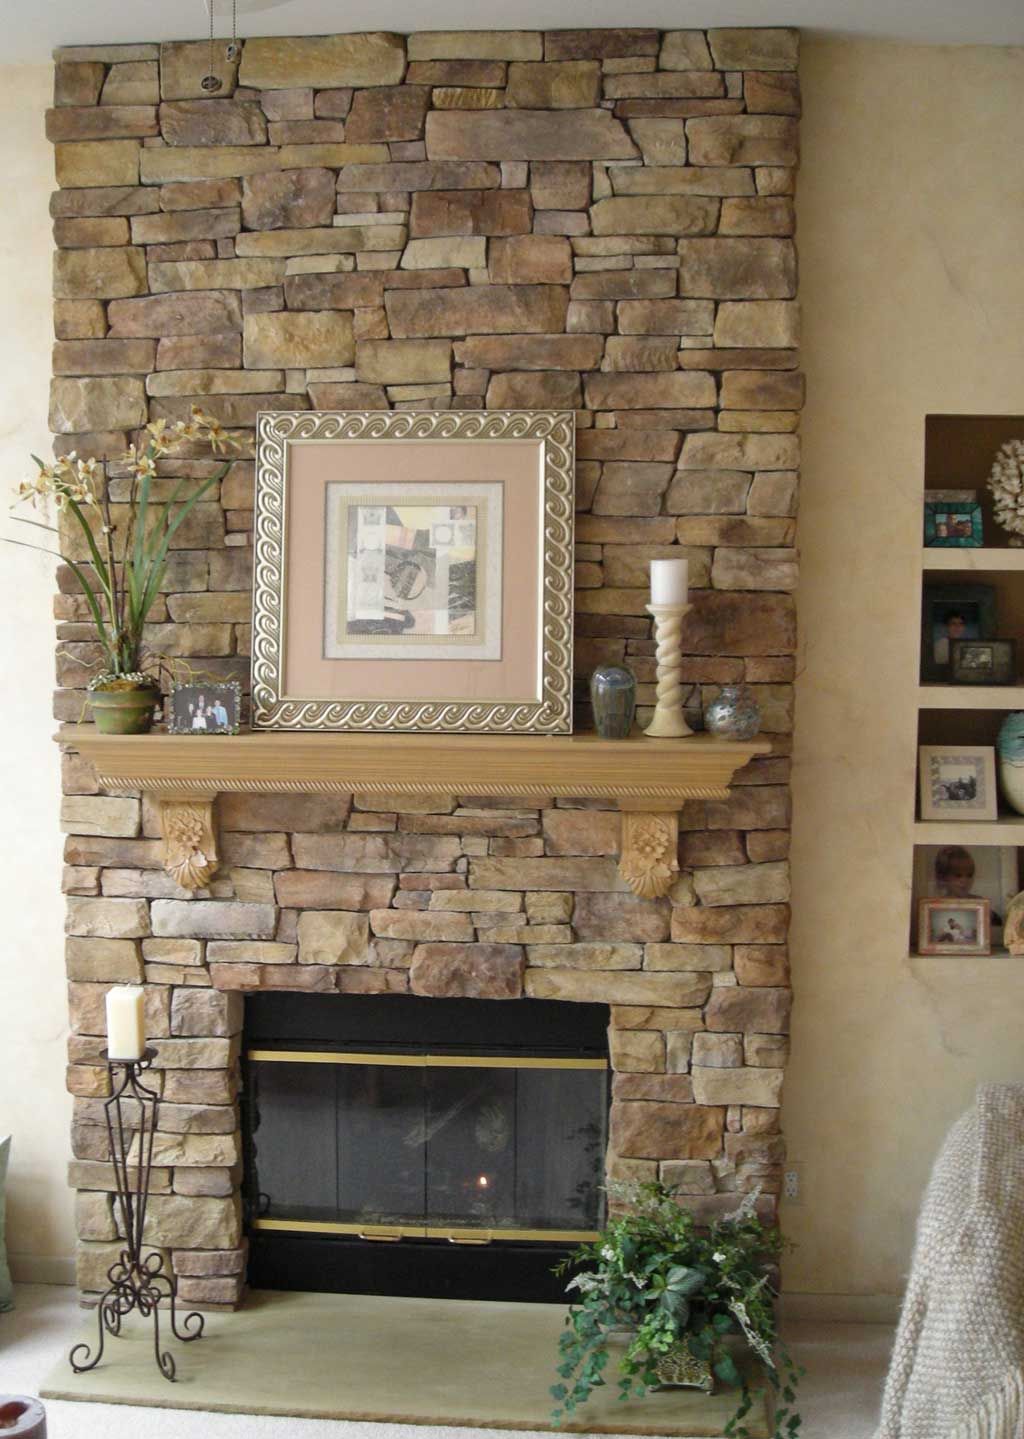 Airstone Fireplace Fresh Stone Veneer Fireplace Design Fireplace In 2019